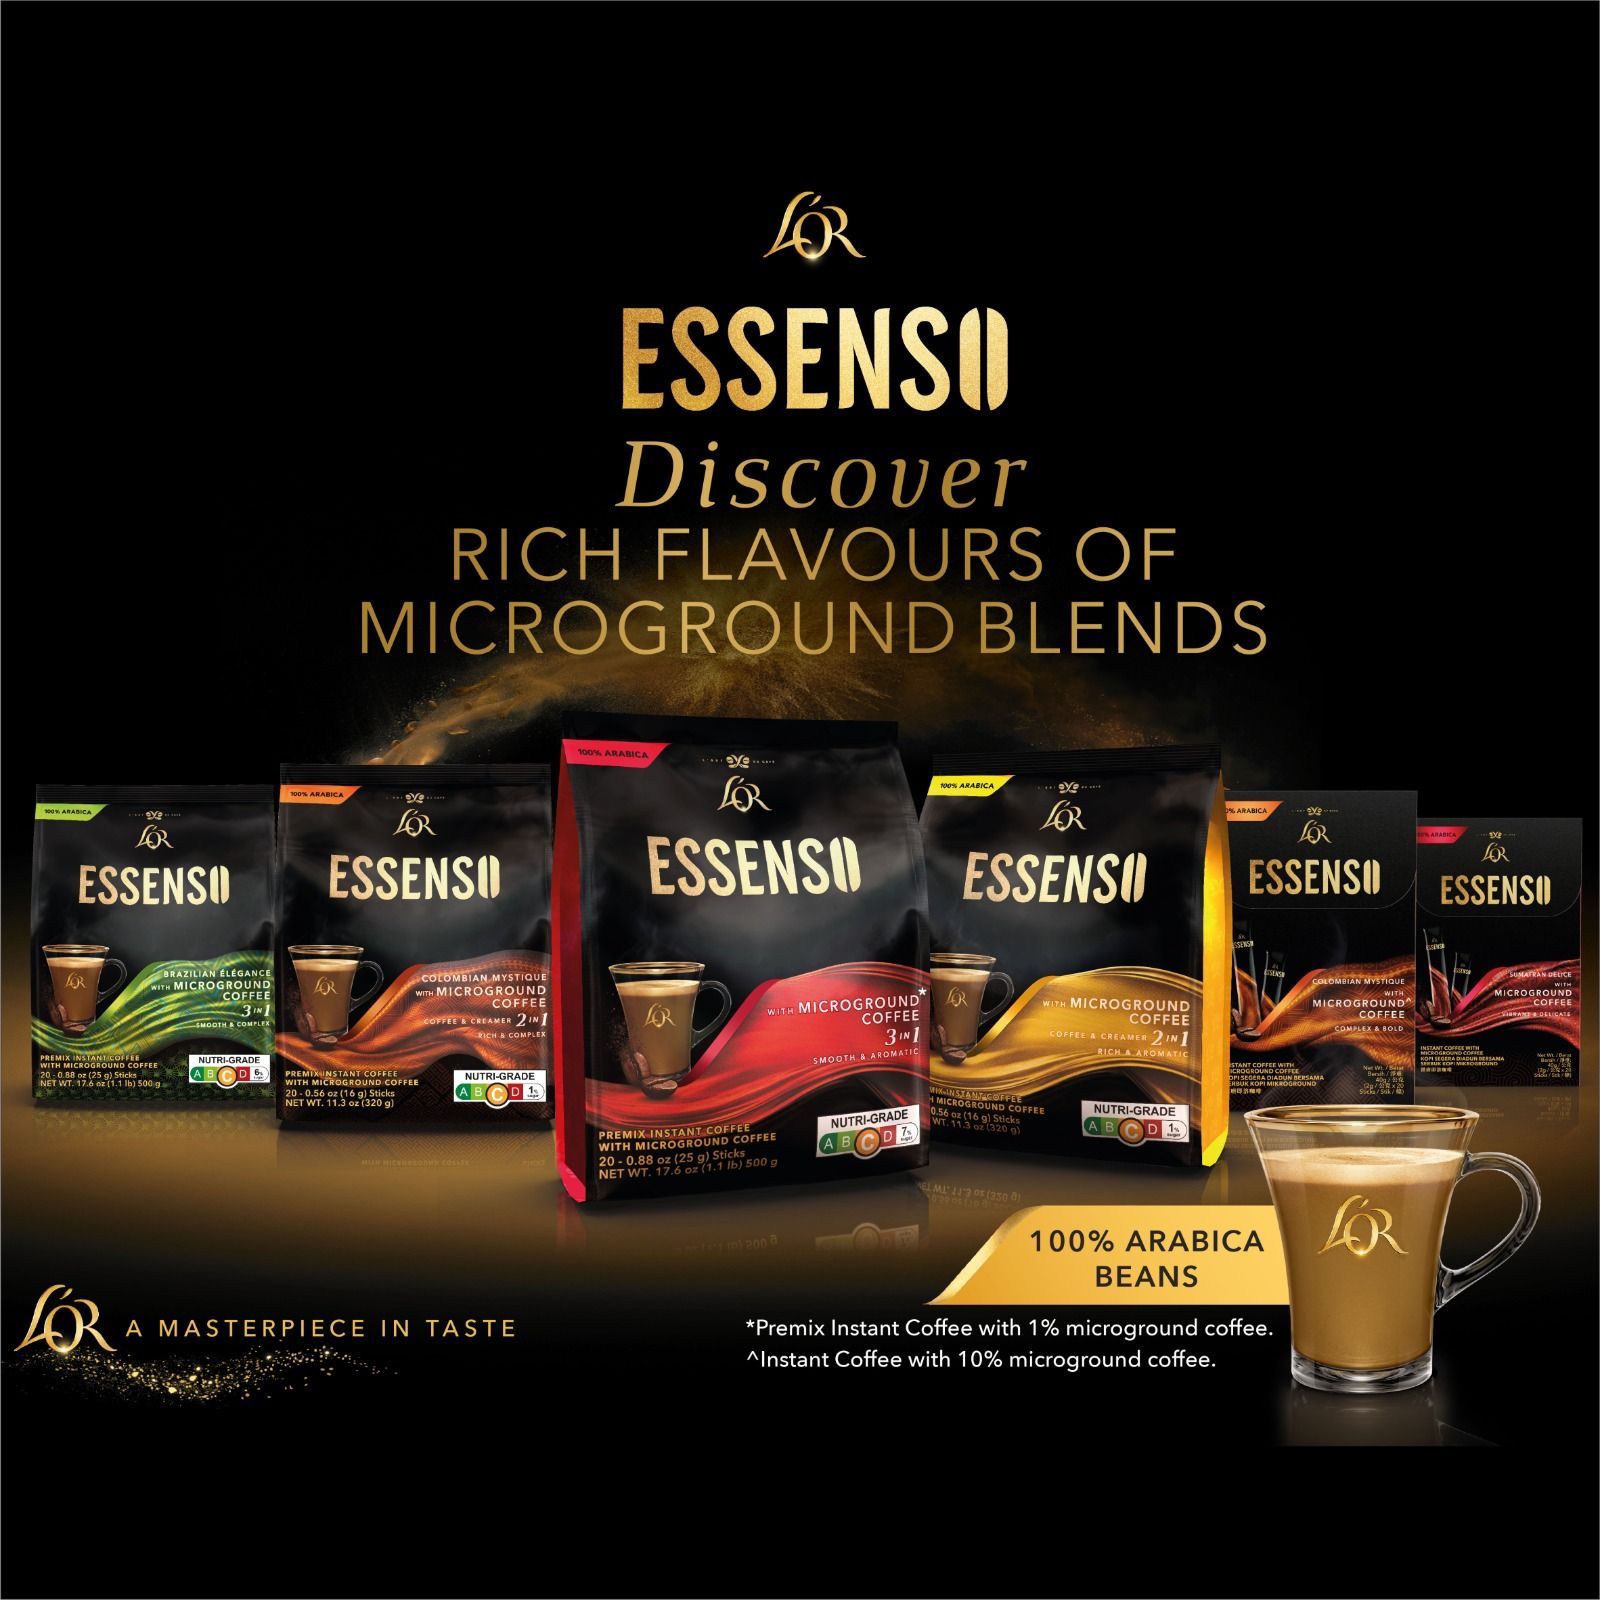 RIch Flavors of Microground Blends